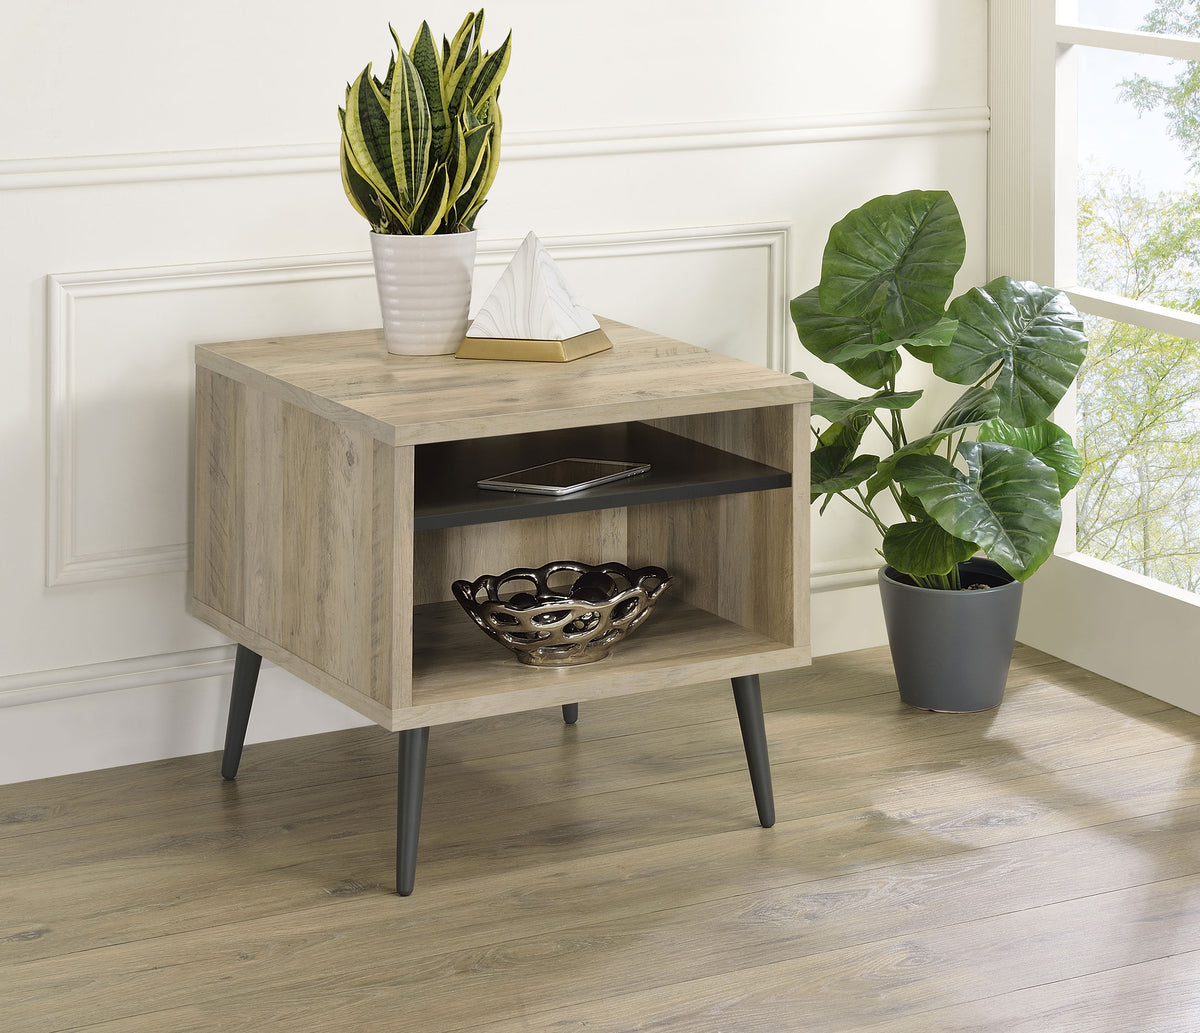 Welsh Square Engineered Wood End Table With Shelf Antique Pine and Grey Welsh Square Engineered Wood End Table With Shelf Antique Pine and Grey Half Price Furniture